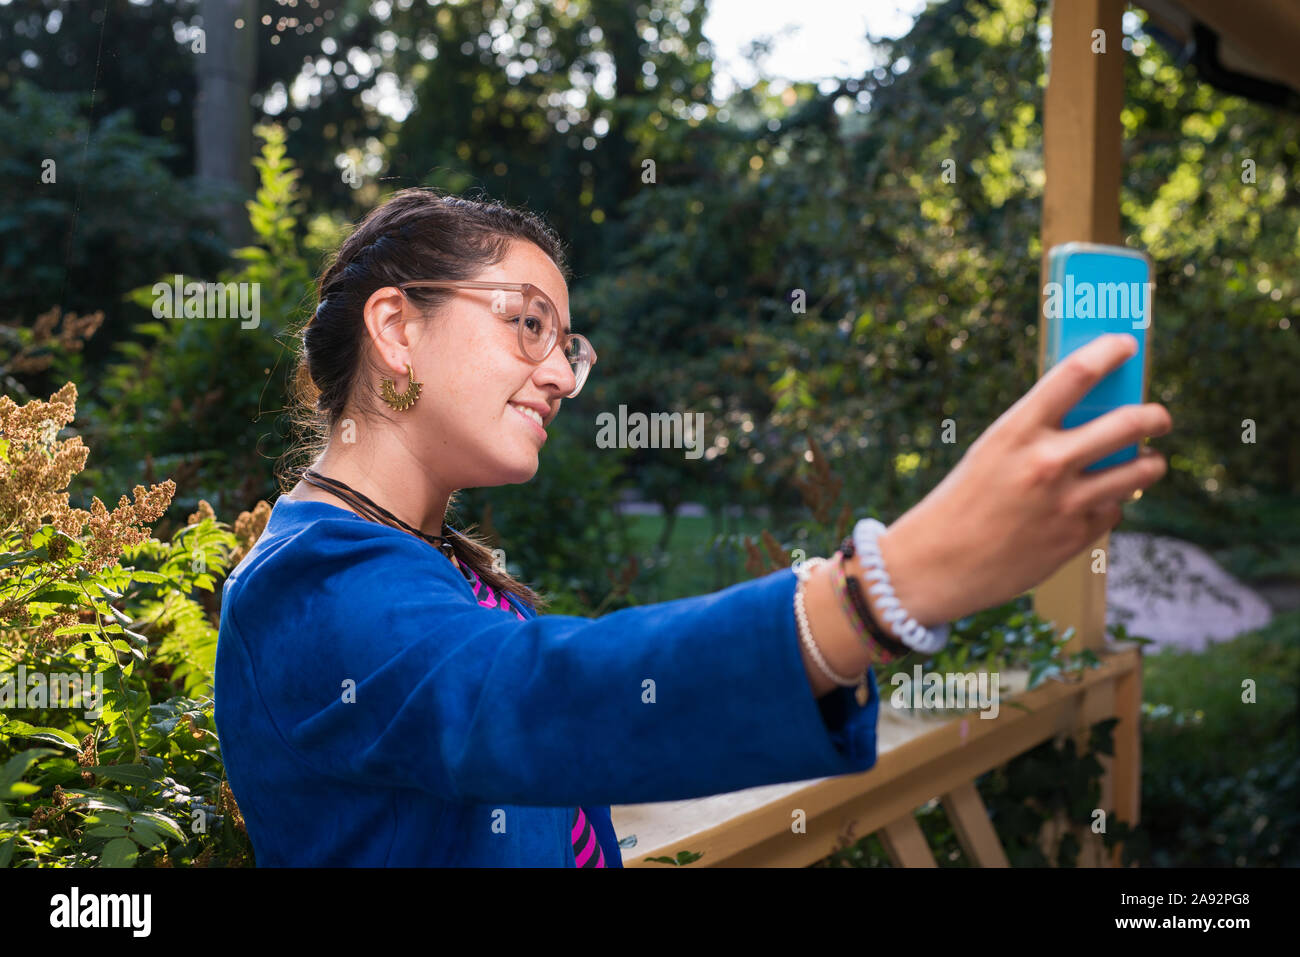 Young woman taking selfie Stock Photo